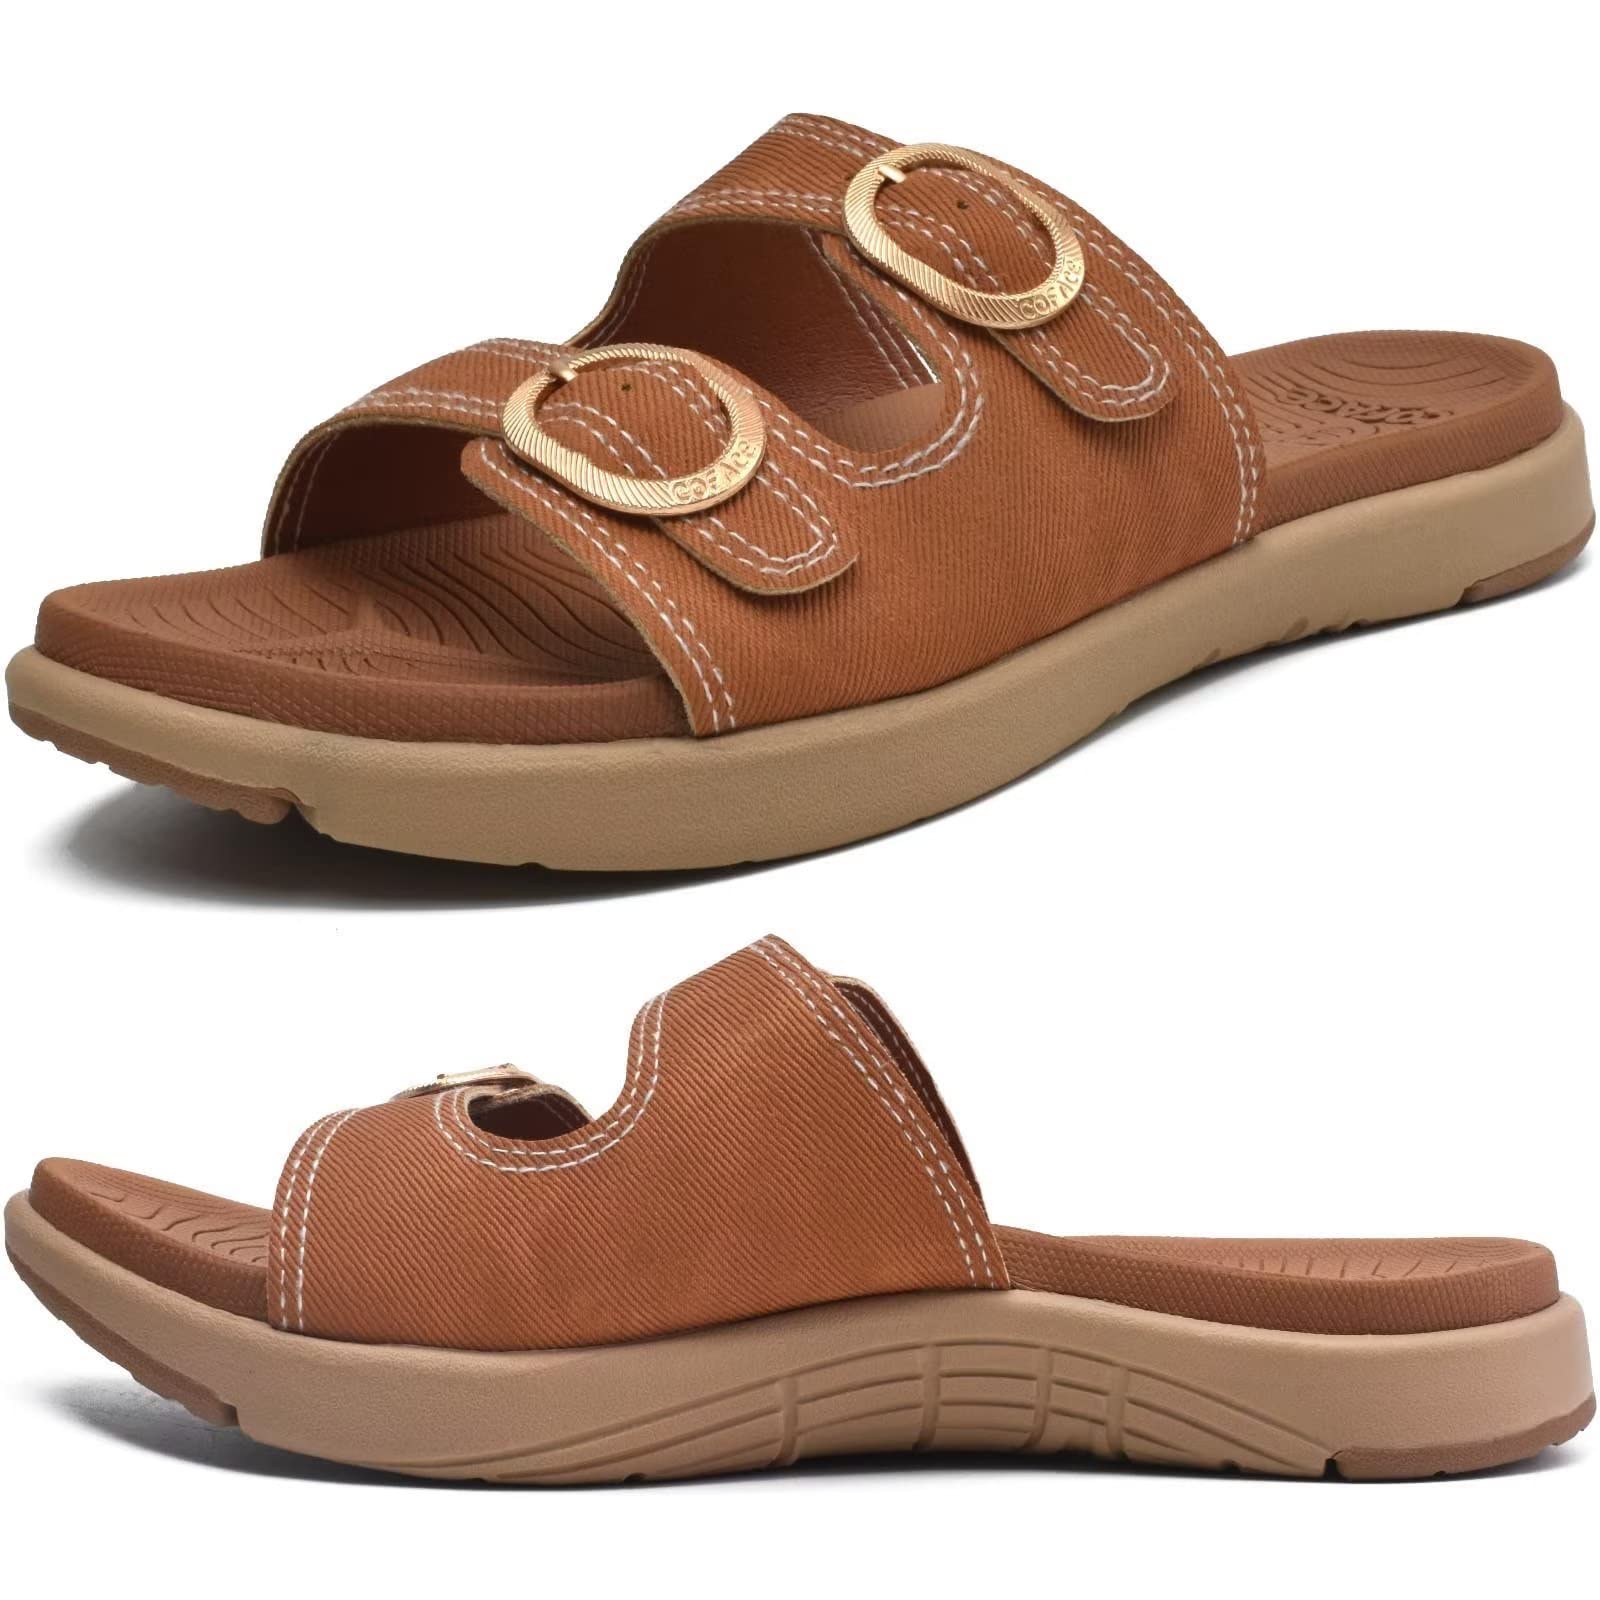 CTEEGC Womens Sandals Plus Size Flat Arch-Support Shoes Beach